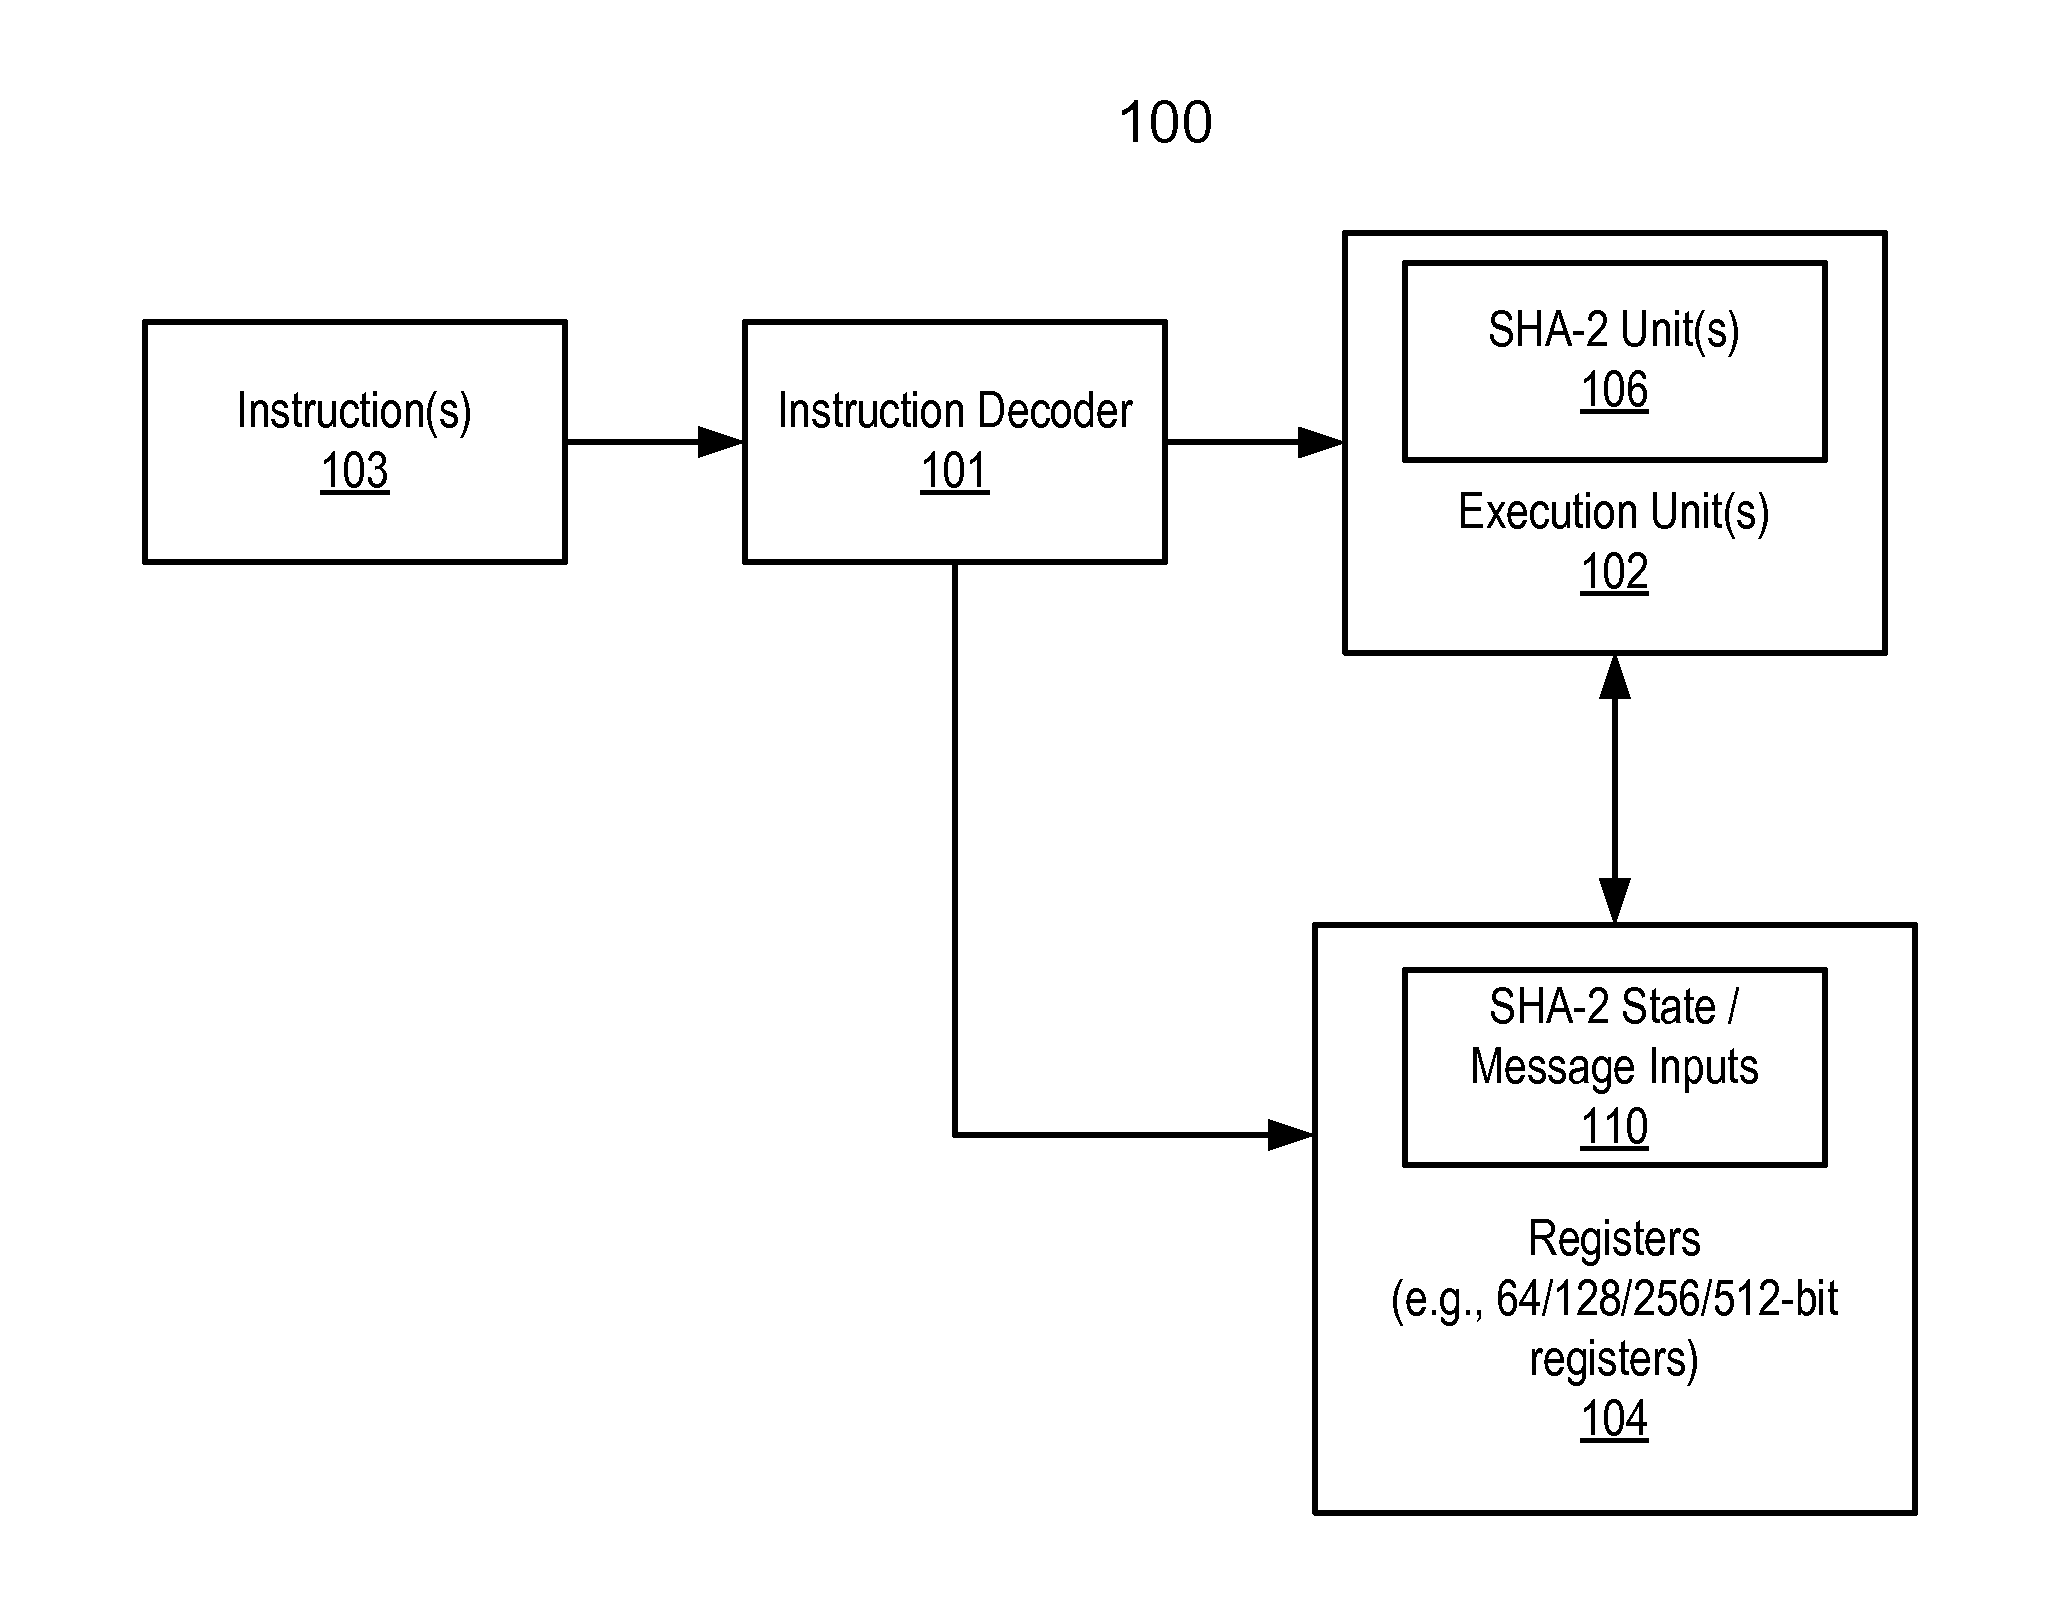 Method and apparatus to process sha-2 secure hashing algorithm